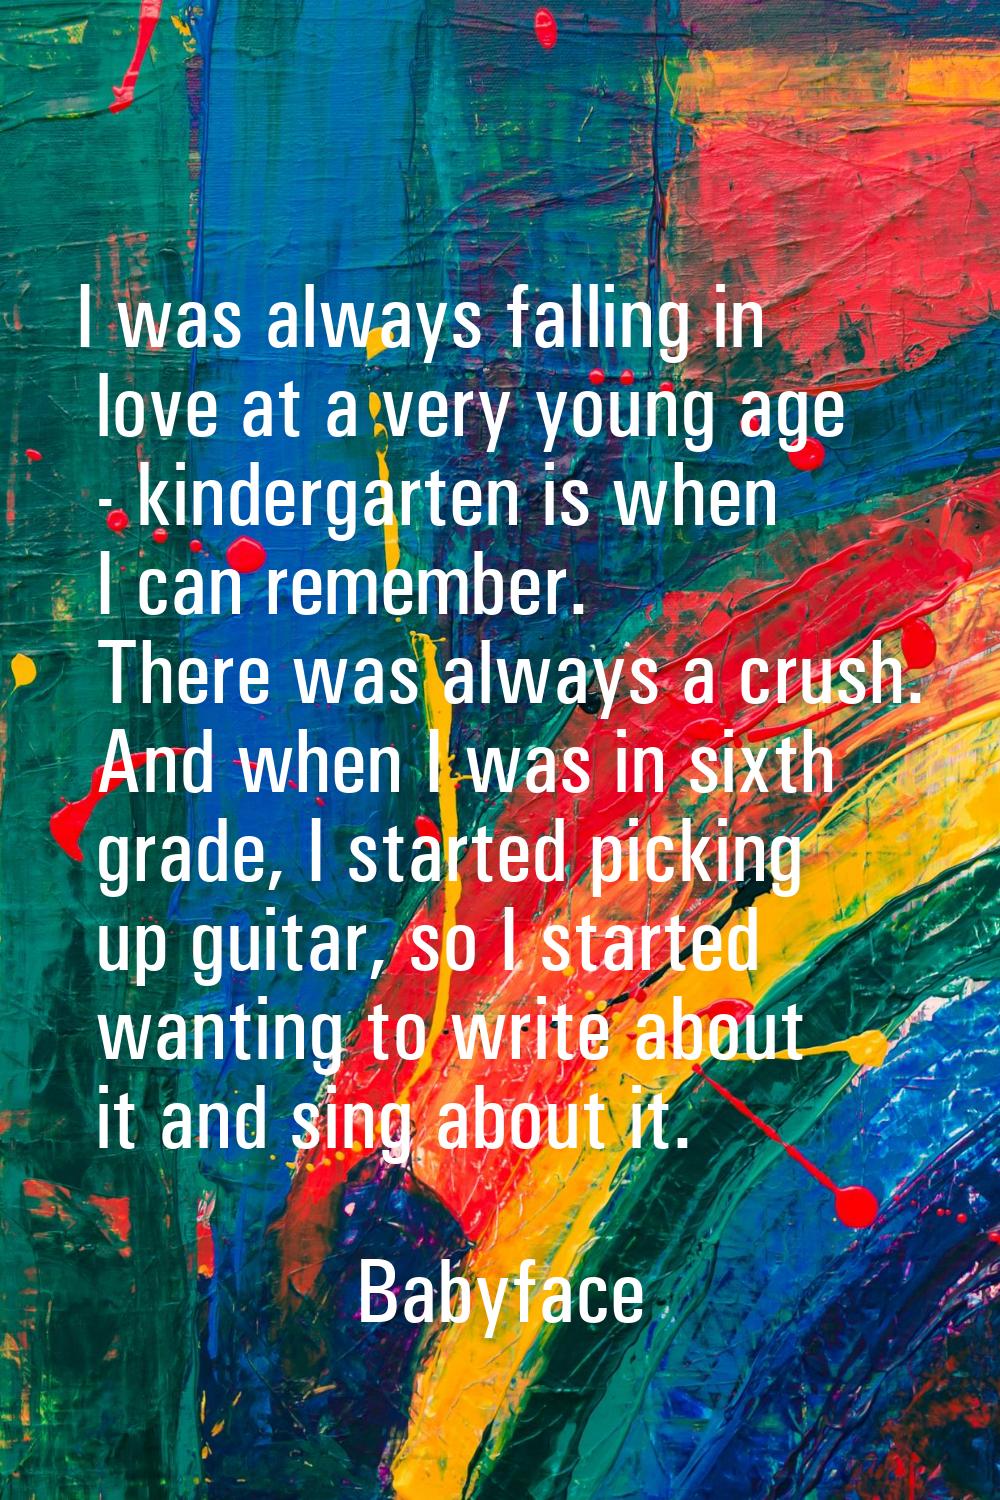 I was always falling in love at a very young age - kindergarten is when I can remember. There was a